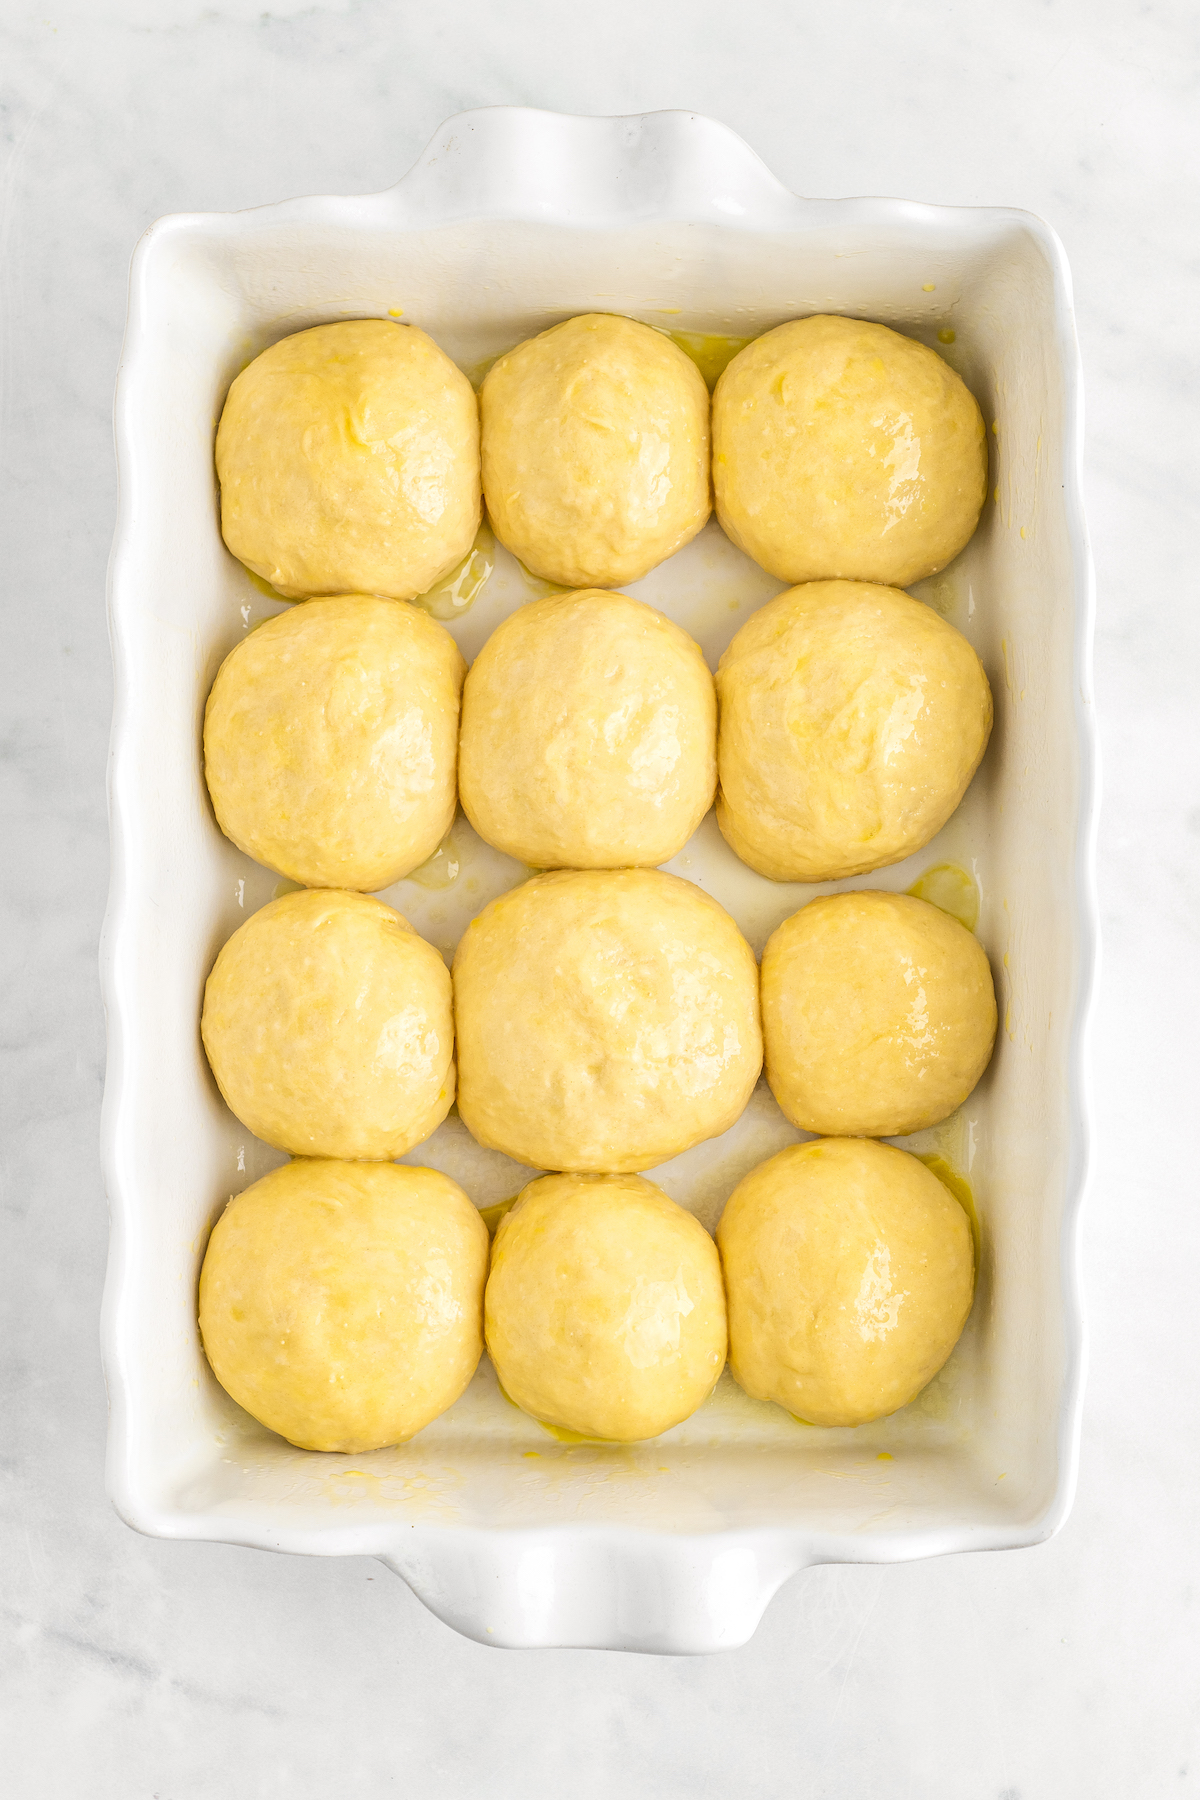 Yeast rolls rising in a large buttered baking dish.